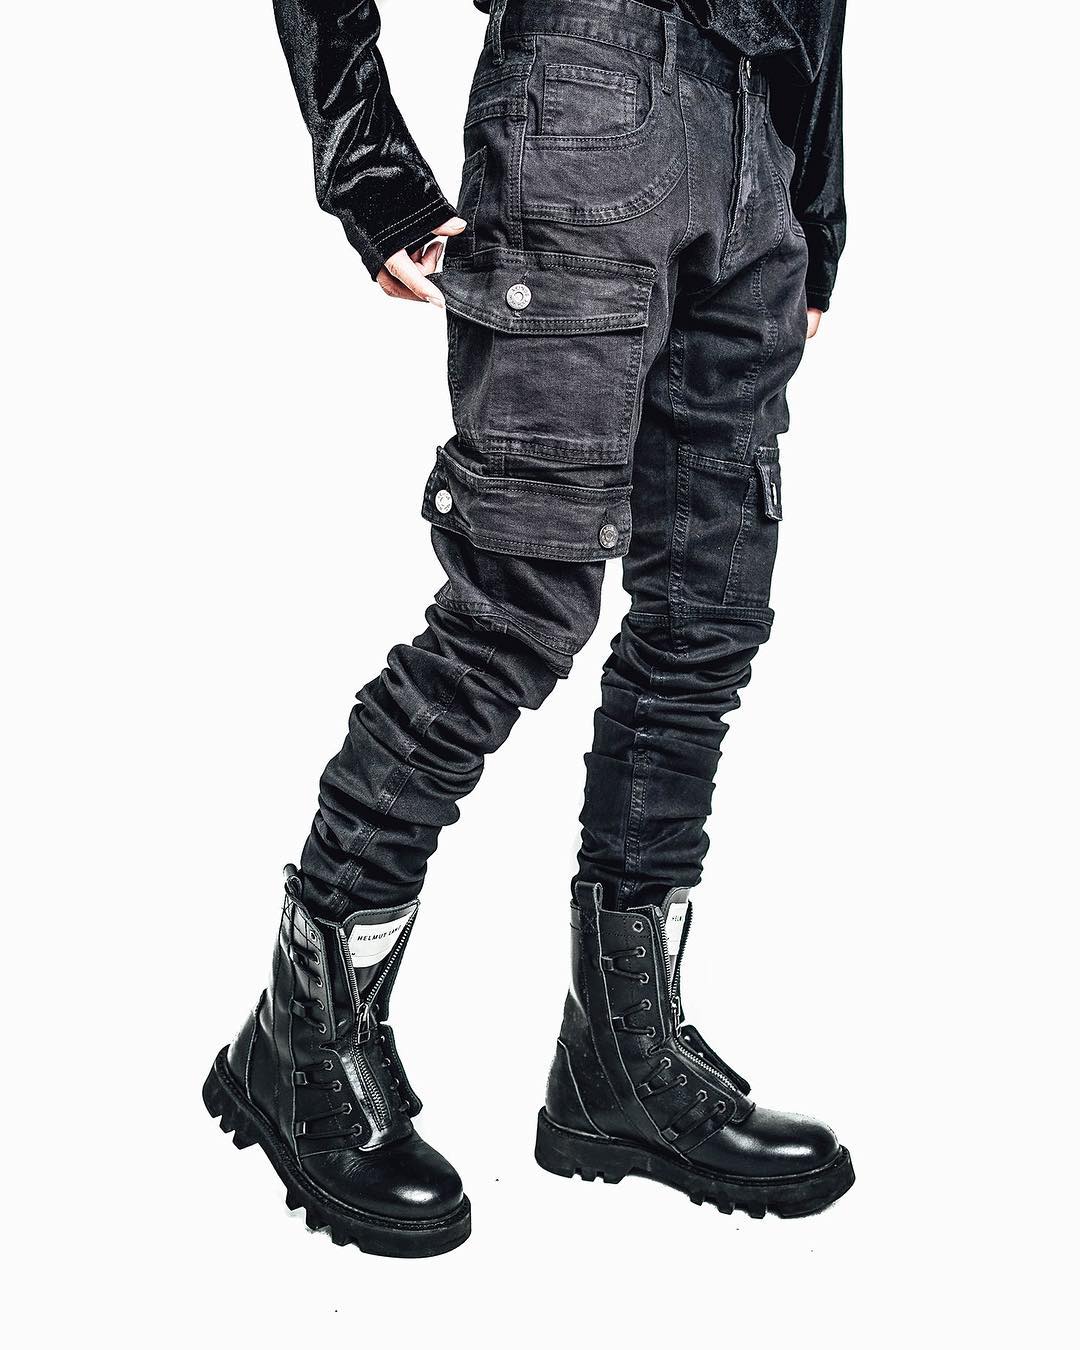 Techwear: Your Complete Guide To This Futuristic Way Of Dressing